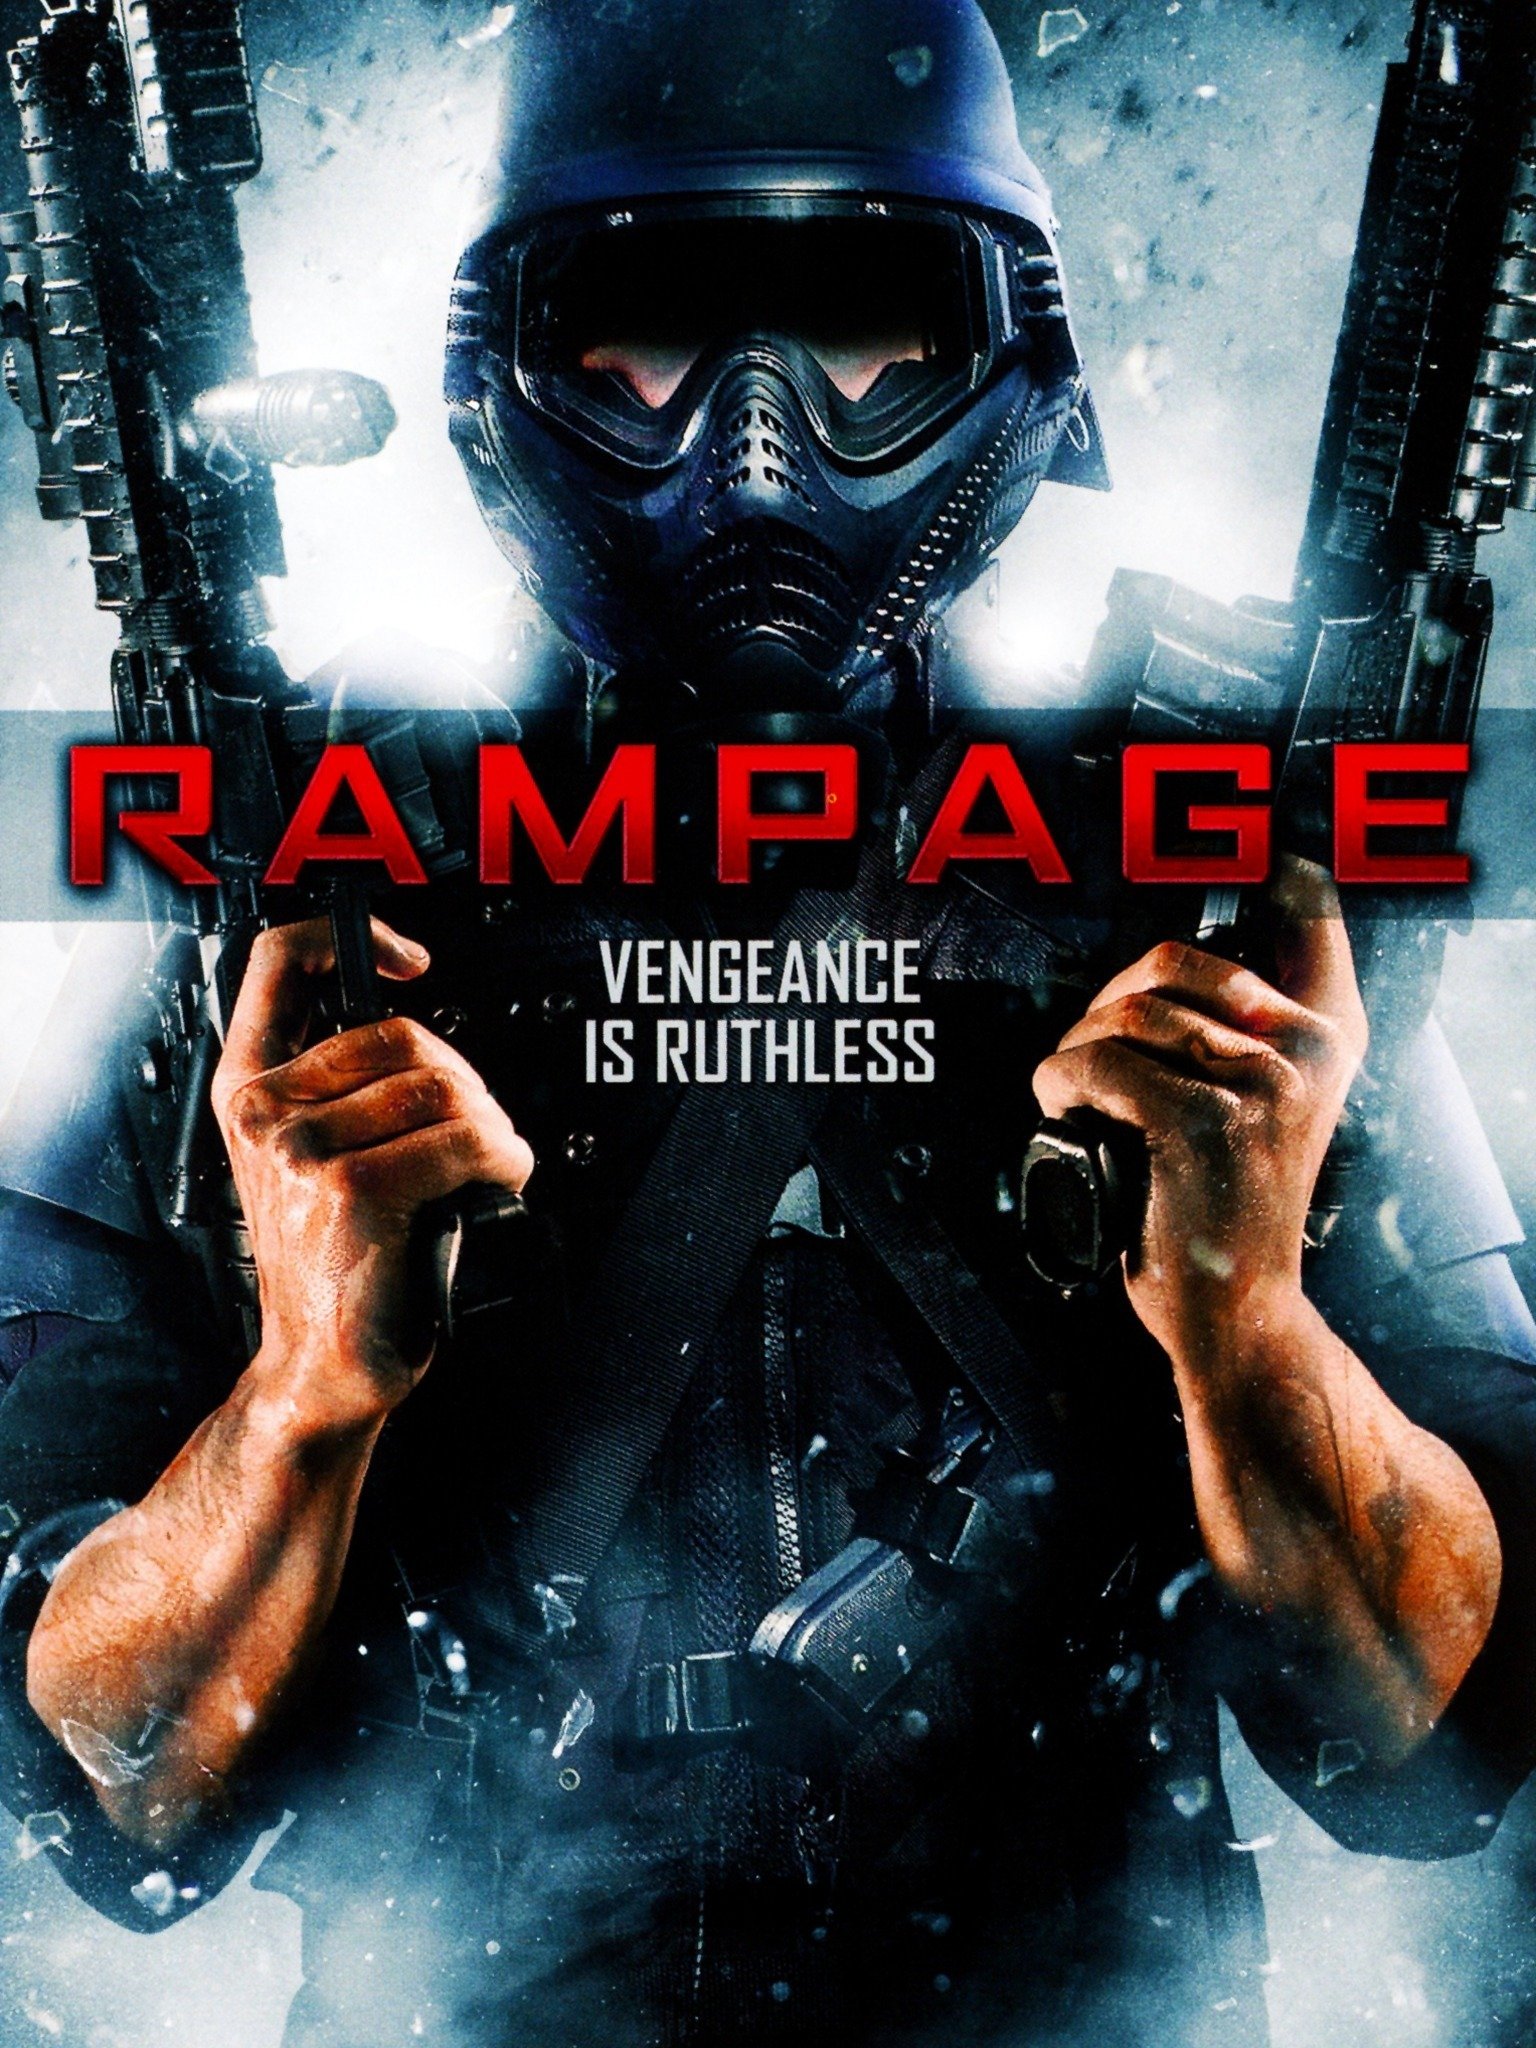 Rampage (2009) - Rotten Tomatoes